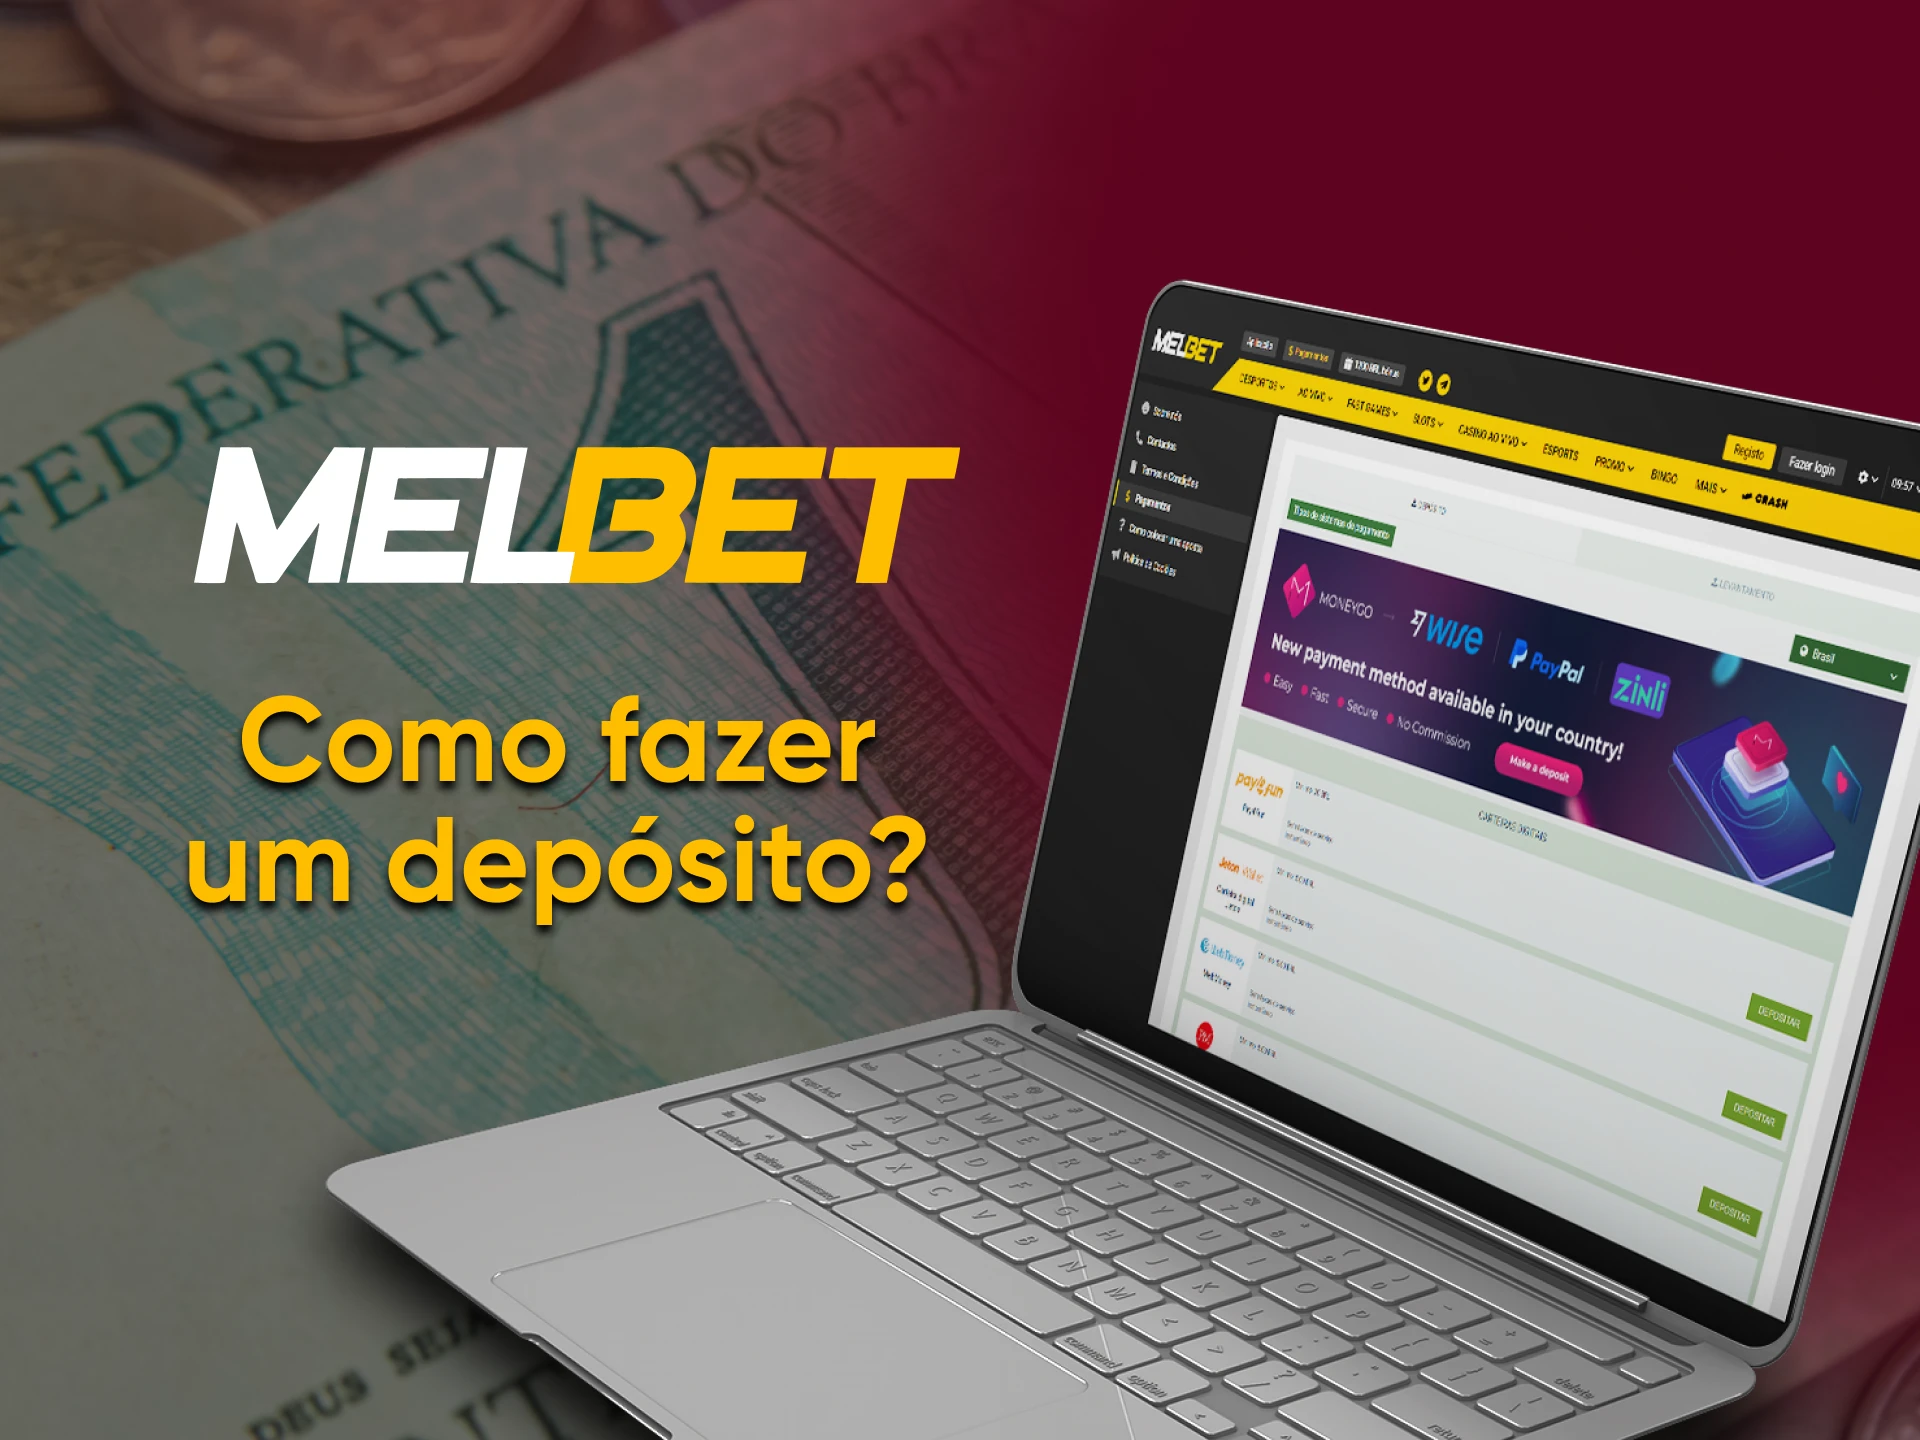 Deposit funds conveniently at Melbet.